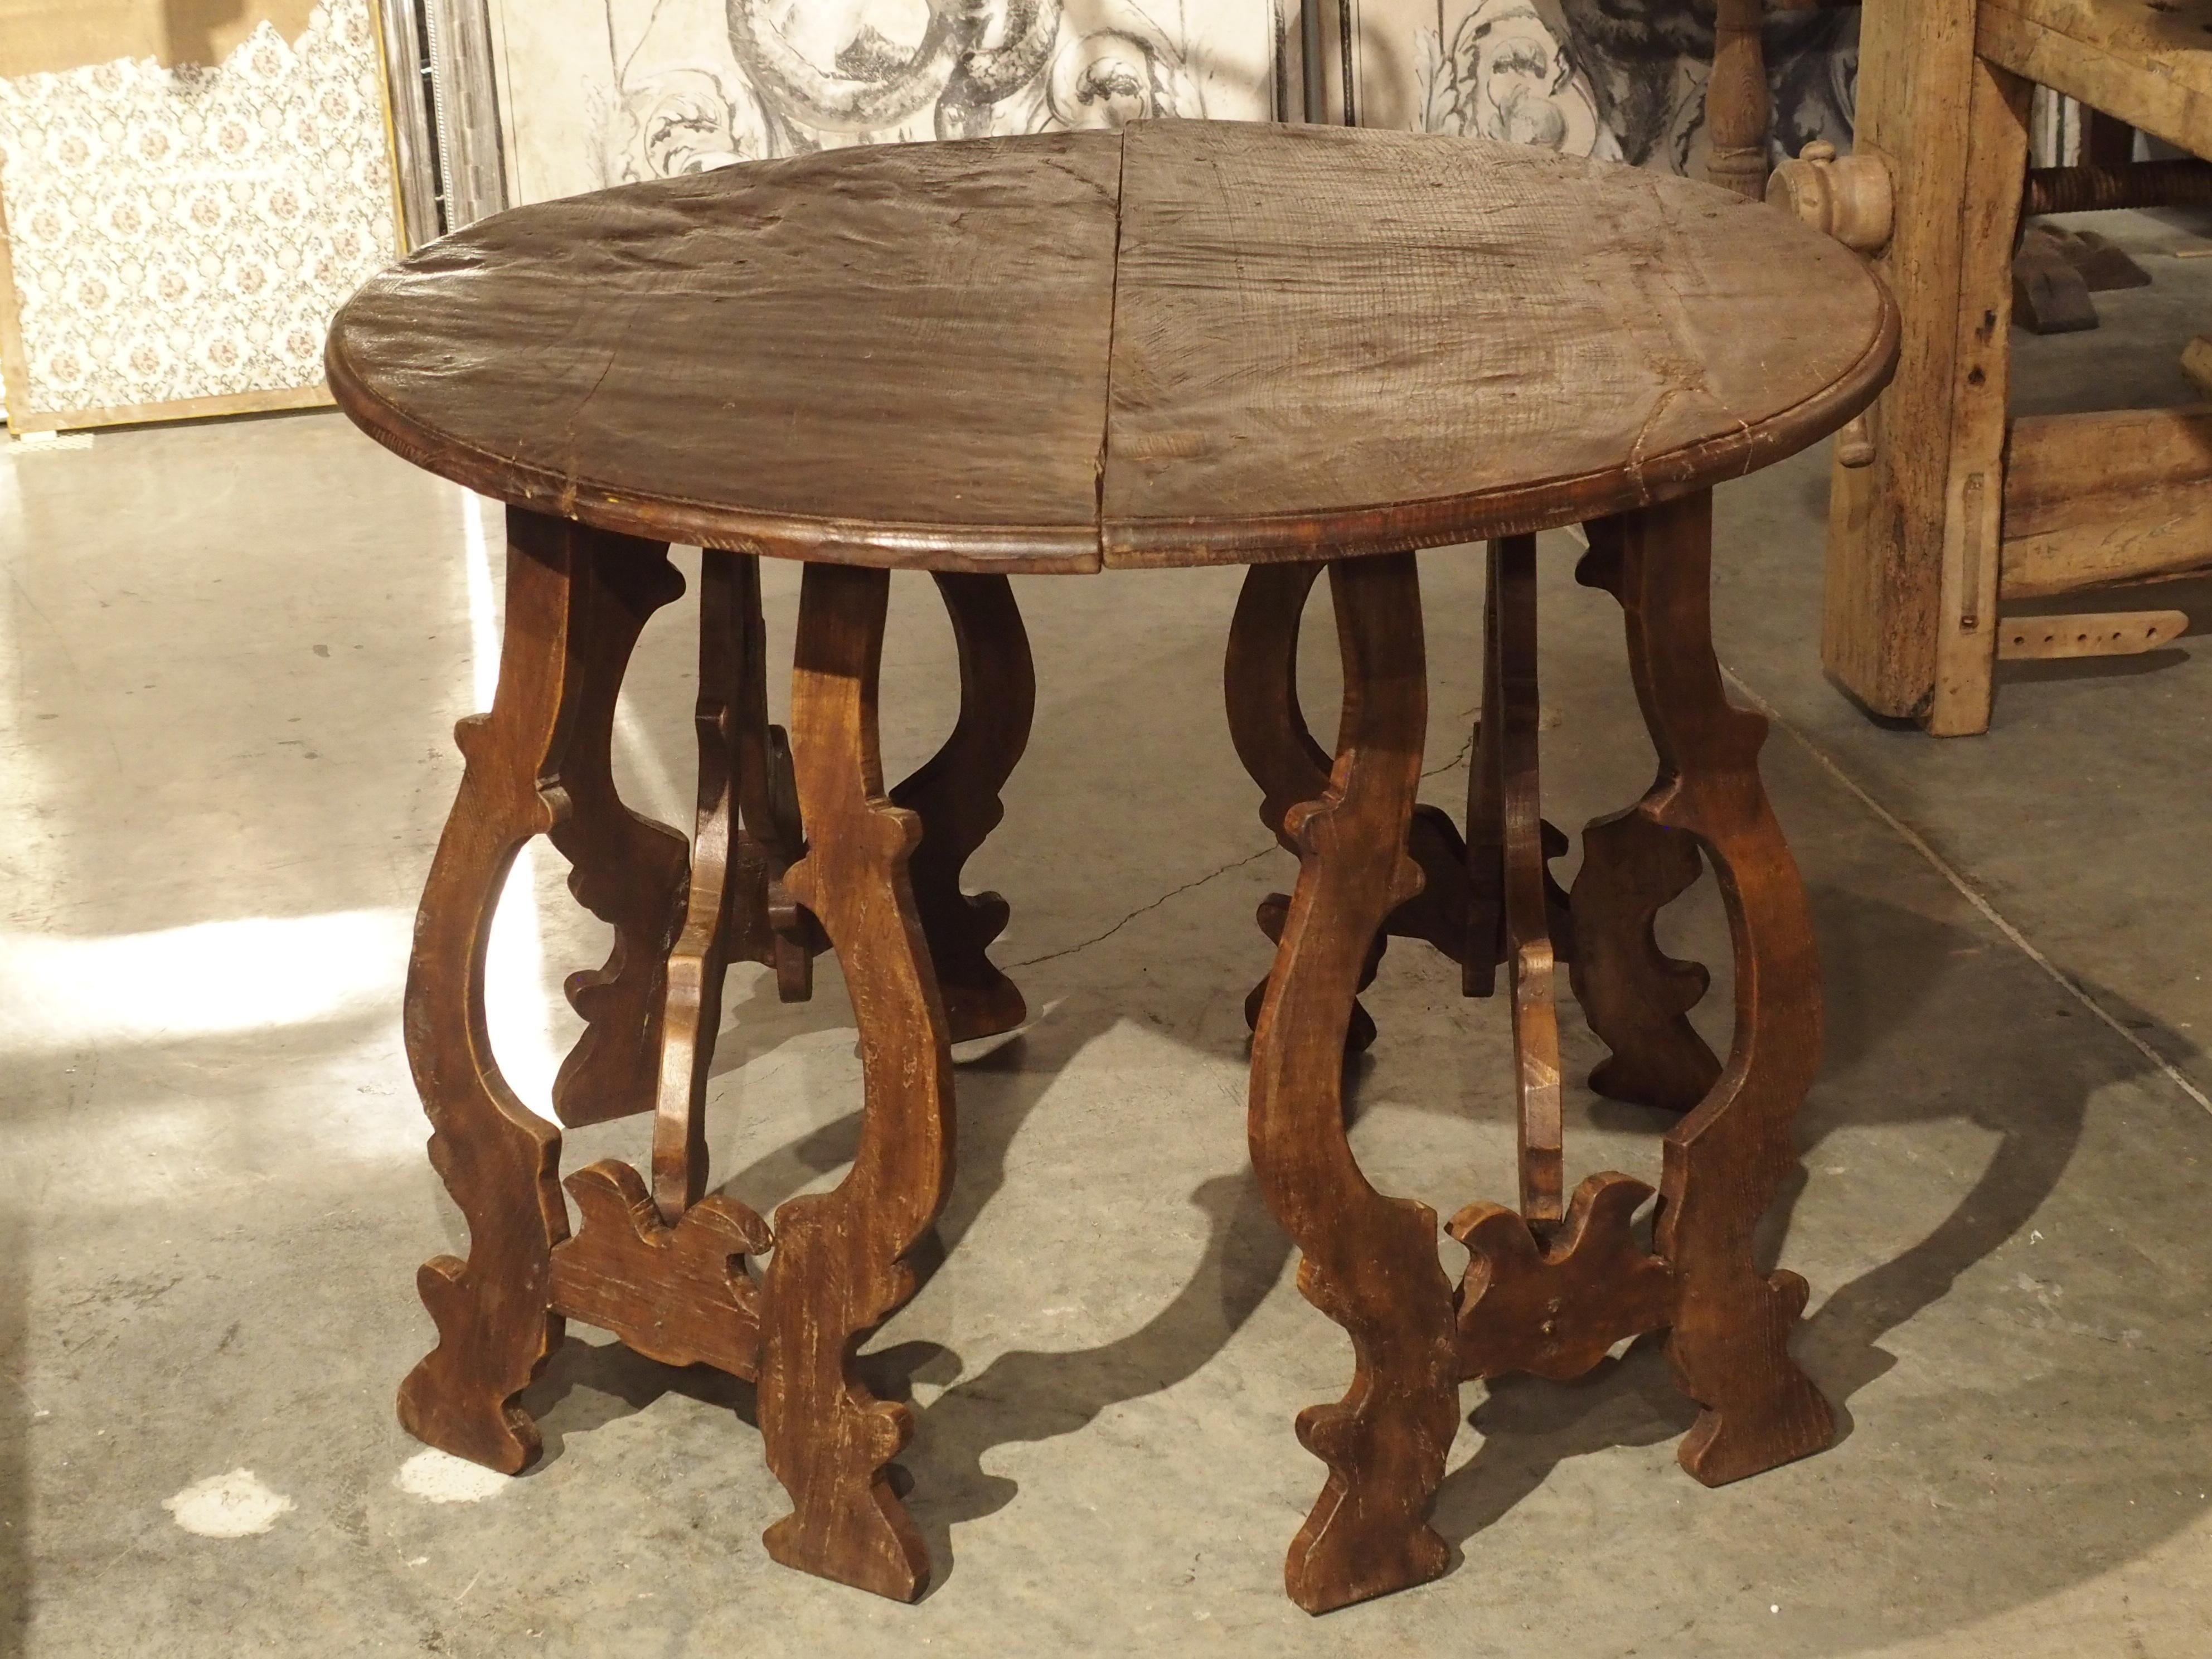 These demilune tables are carved from old planks of Italian chestnut. Tables like this were first used in Italy and Spain in the early 1600s and really never went out of fashion. When not in use as a center table, they can be separated and used